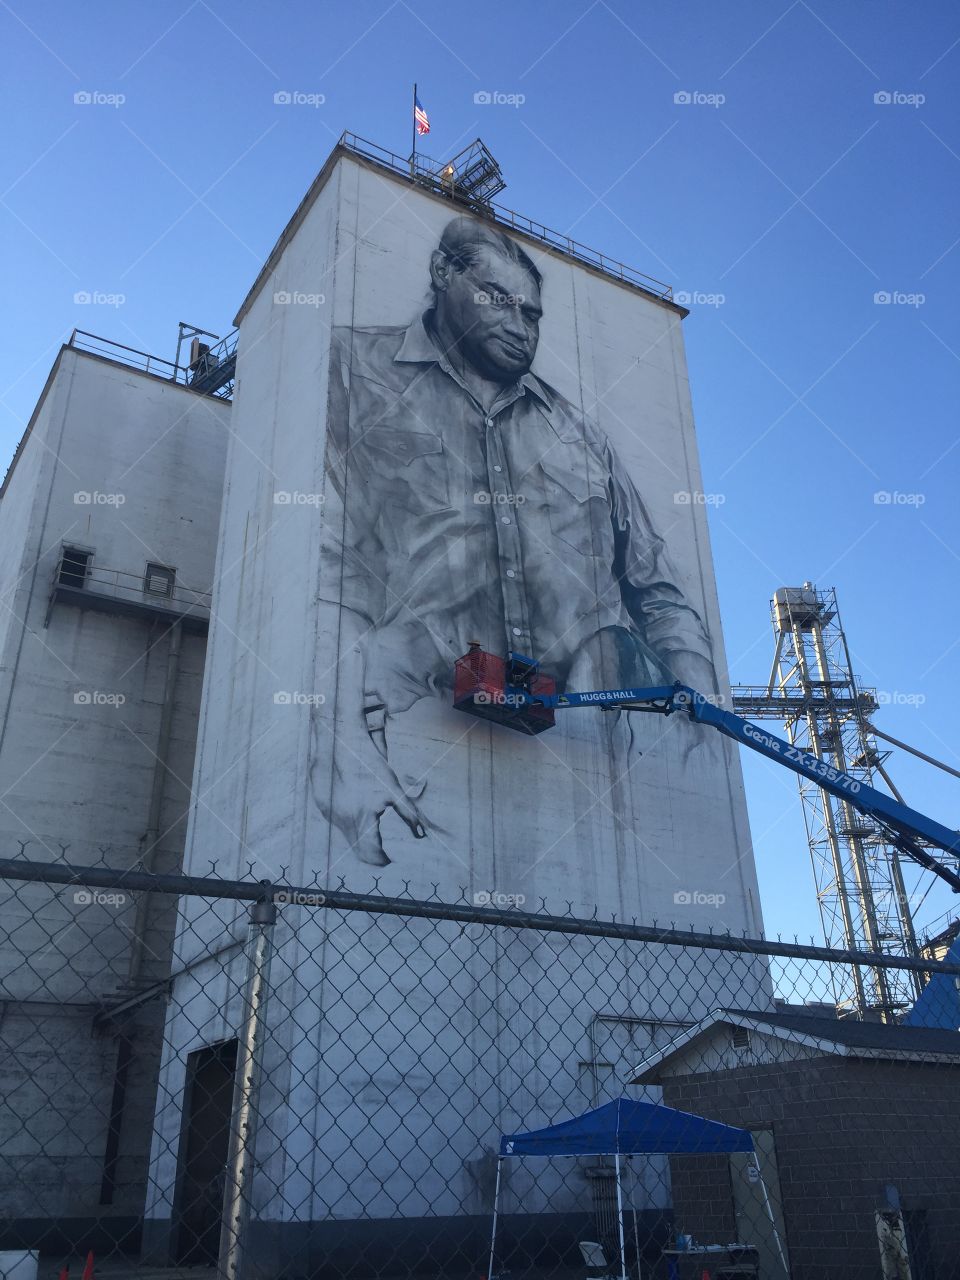 Mural artist at work creating portrait on a grain elevator in Fort Smith, Arkansas. 